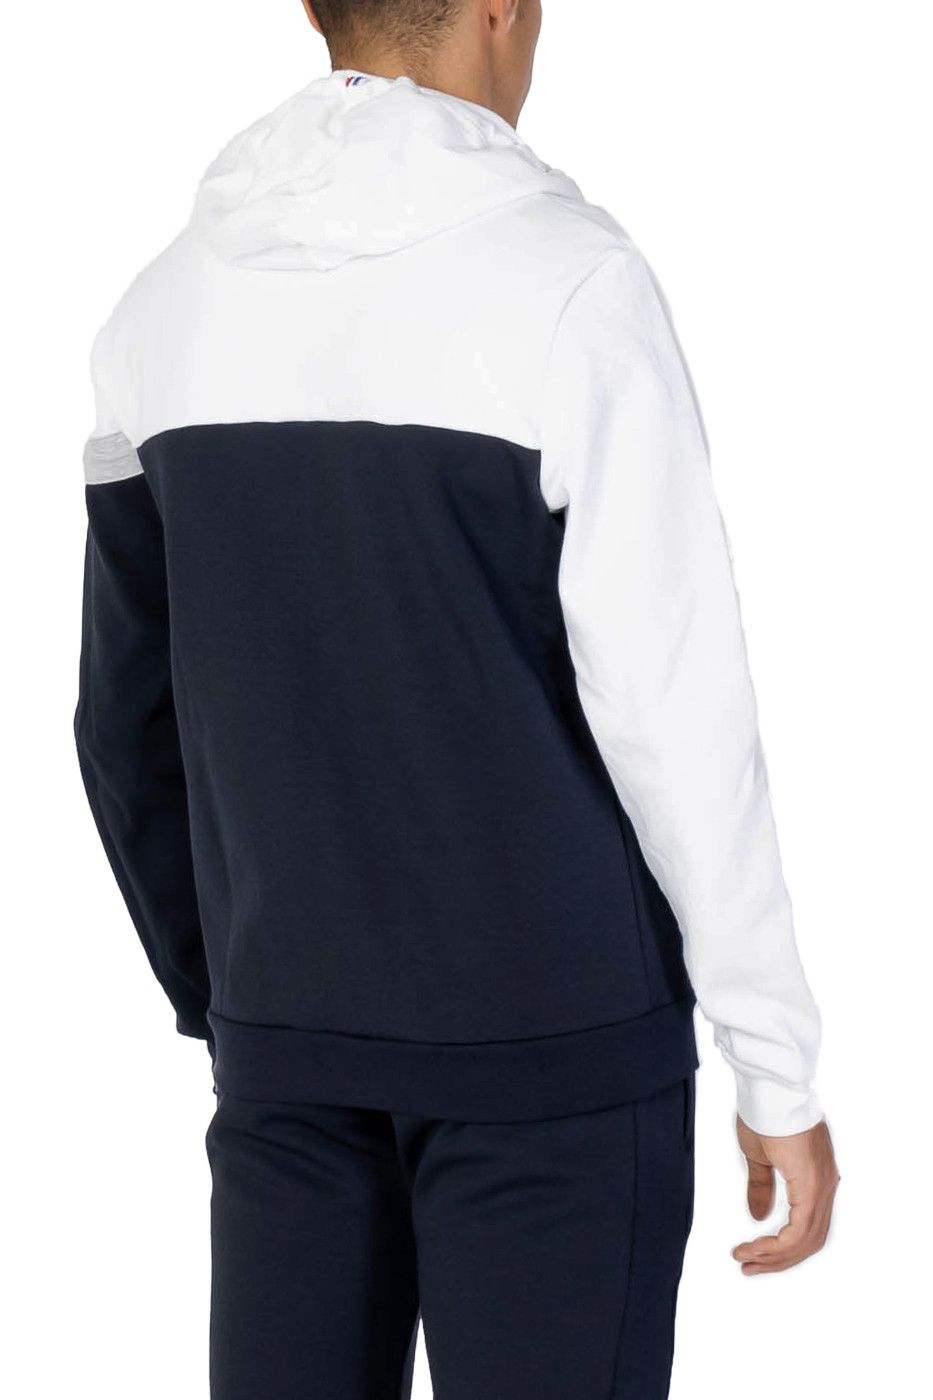 Brand: Le Coq Sportif
Gender: Men
Type: Sweatshirts
Season: Fall/Winter

PRODUCT DETAIL
• Color: white
• Fastening: with zip
• Collar: hood
• Pockets: front pockets

COMPOSITION AND MATERIAL
• Composition: -70% cotton -30% polyester 
•  Washing: machine wash at 30°